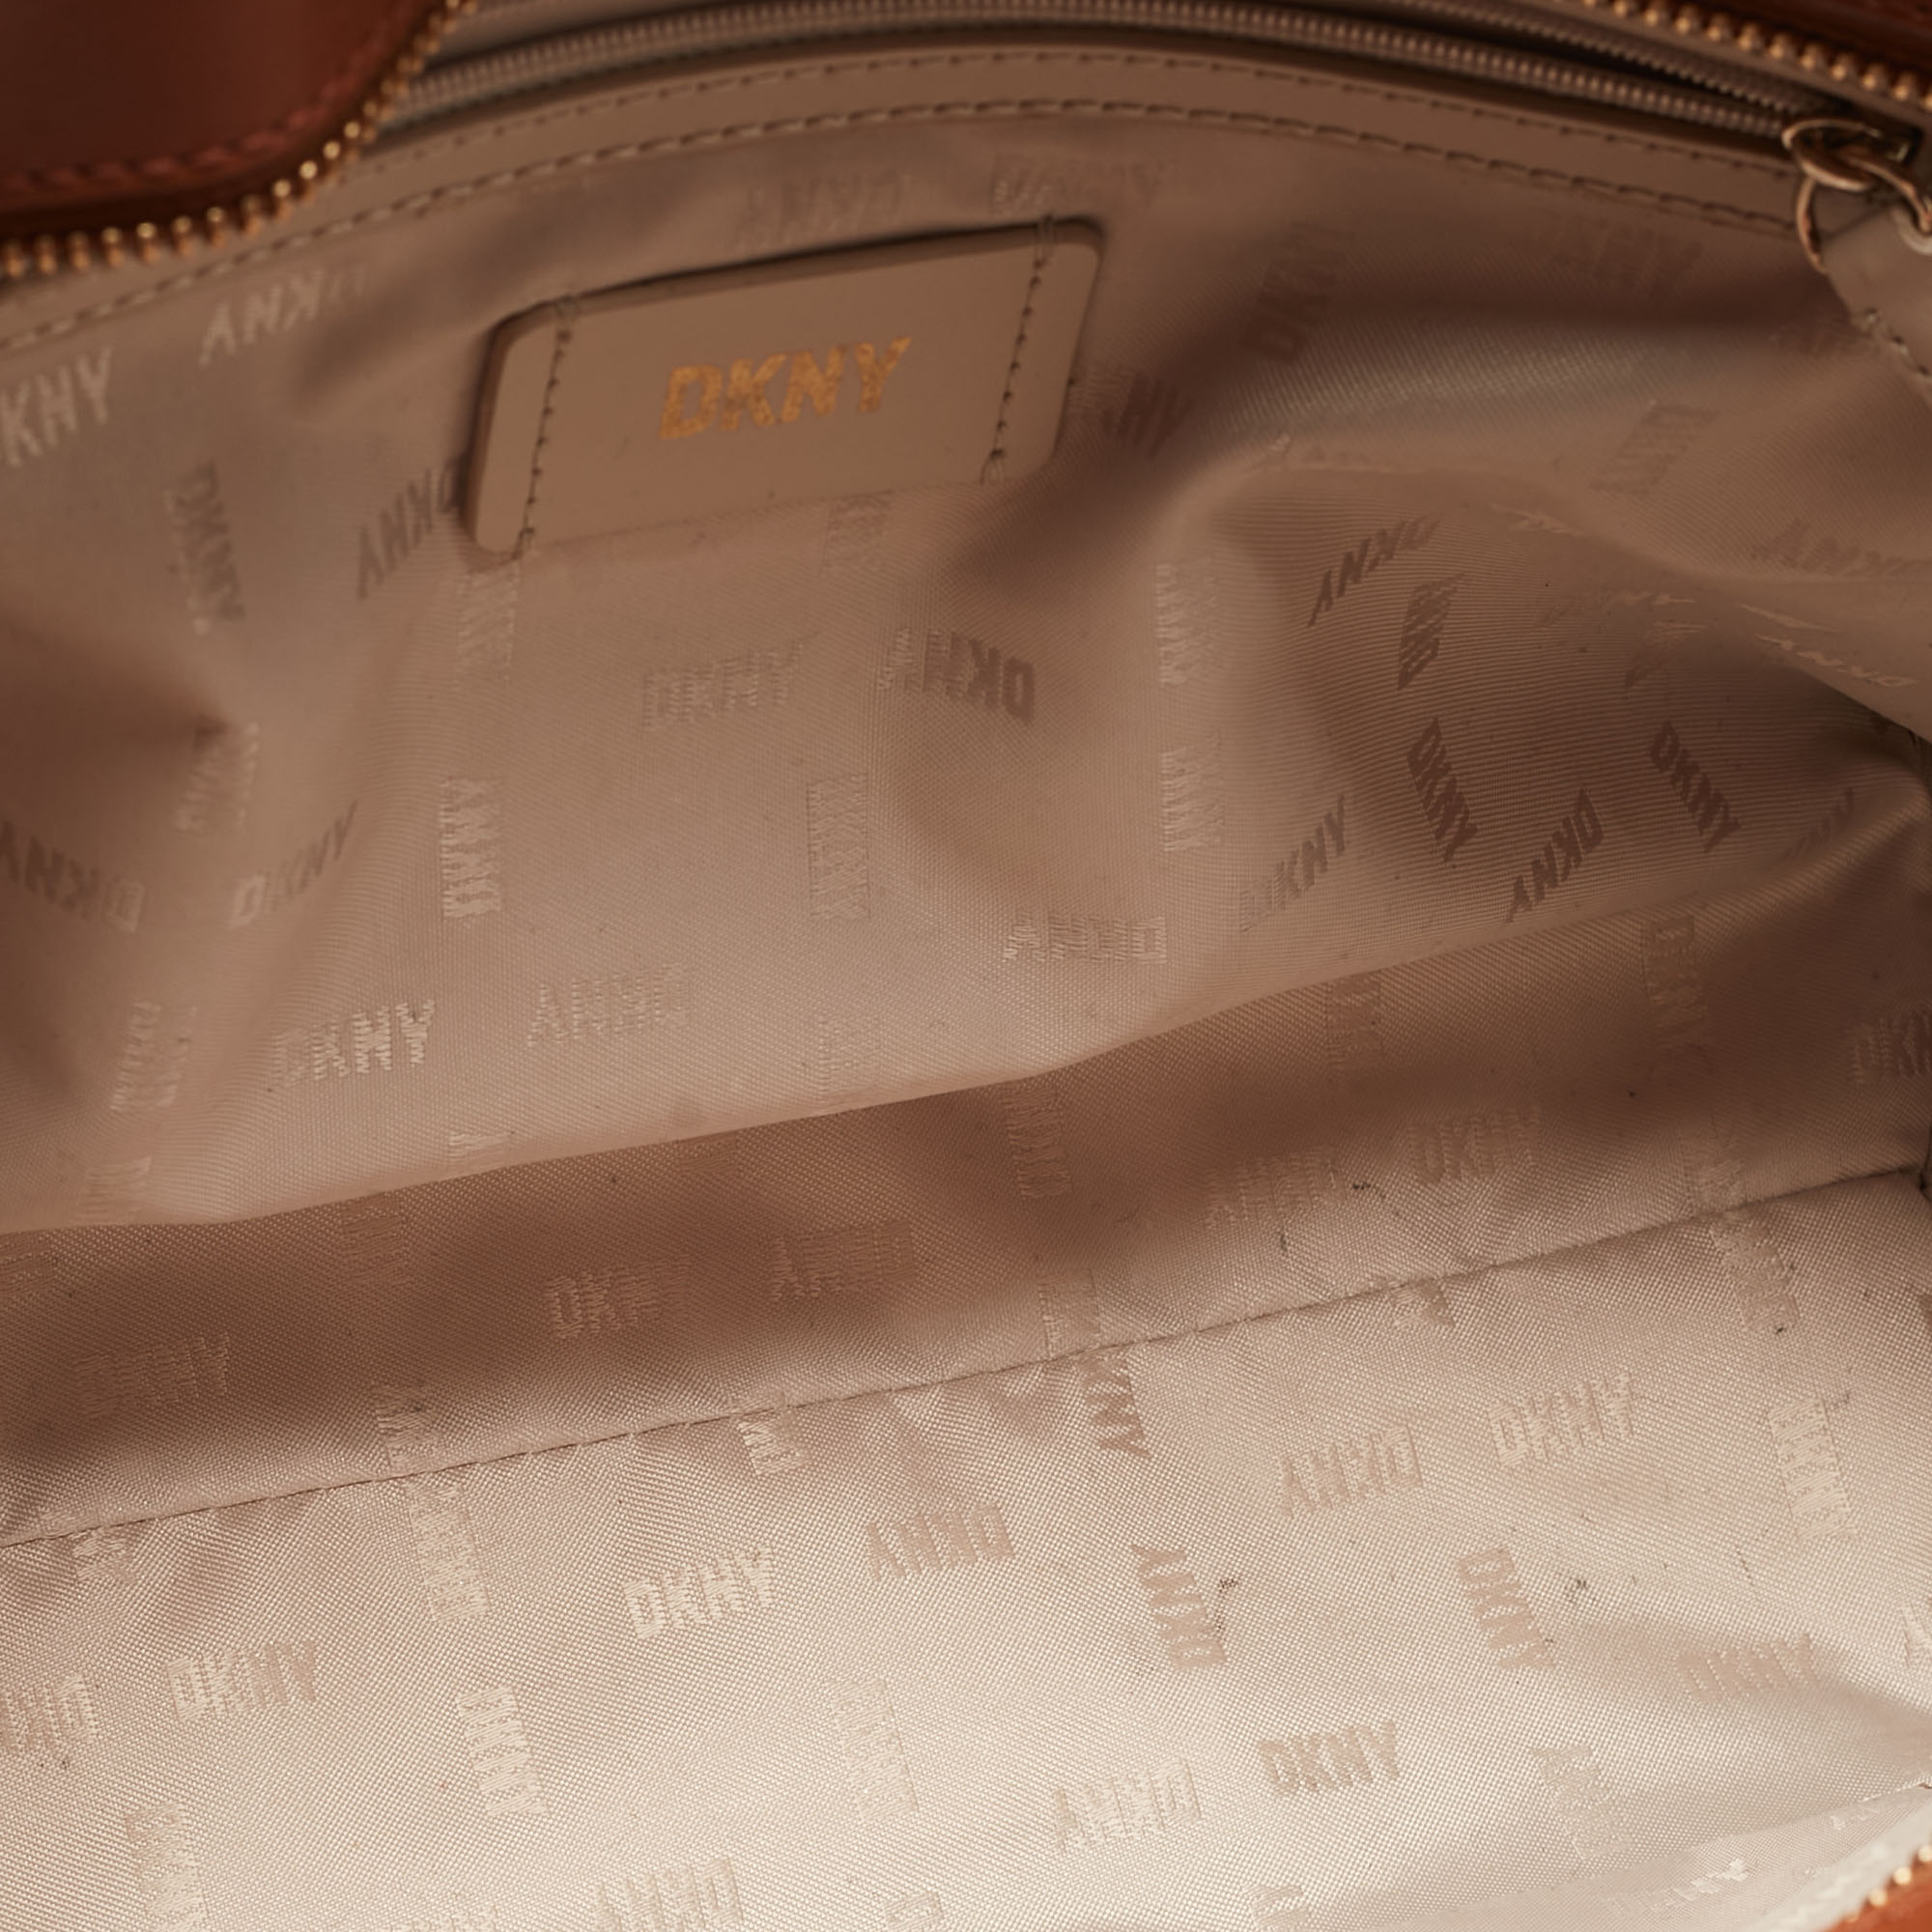 DKNY Brown Textured Leather Bryant Tote